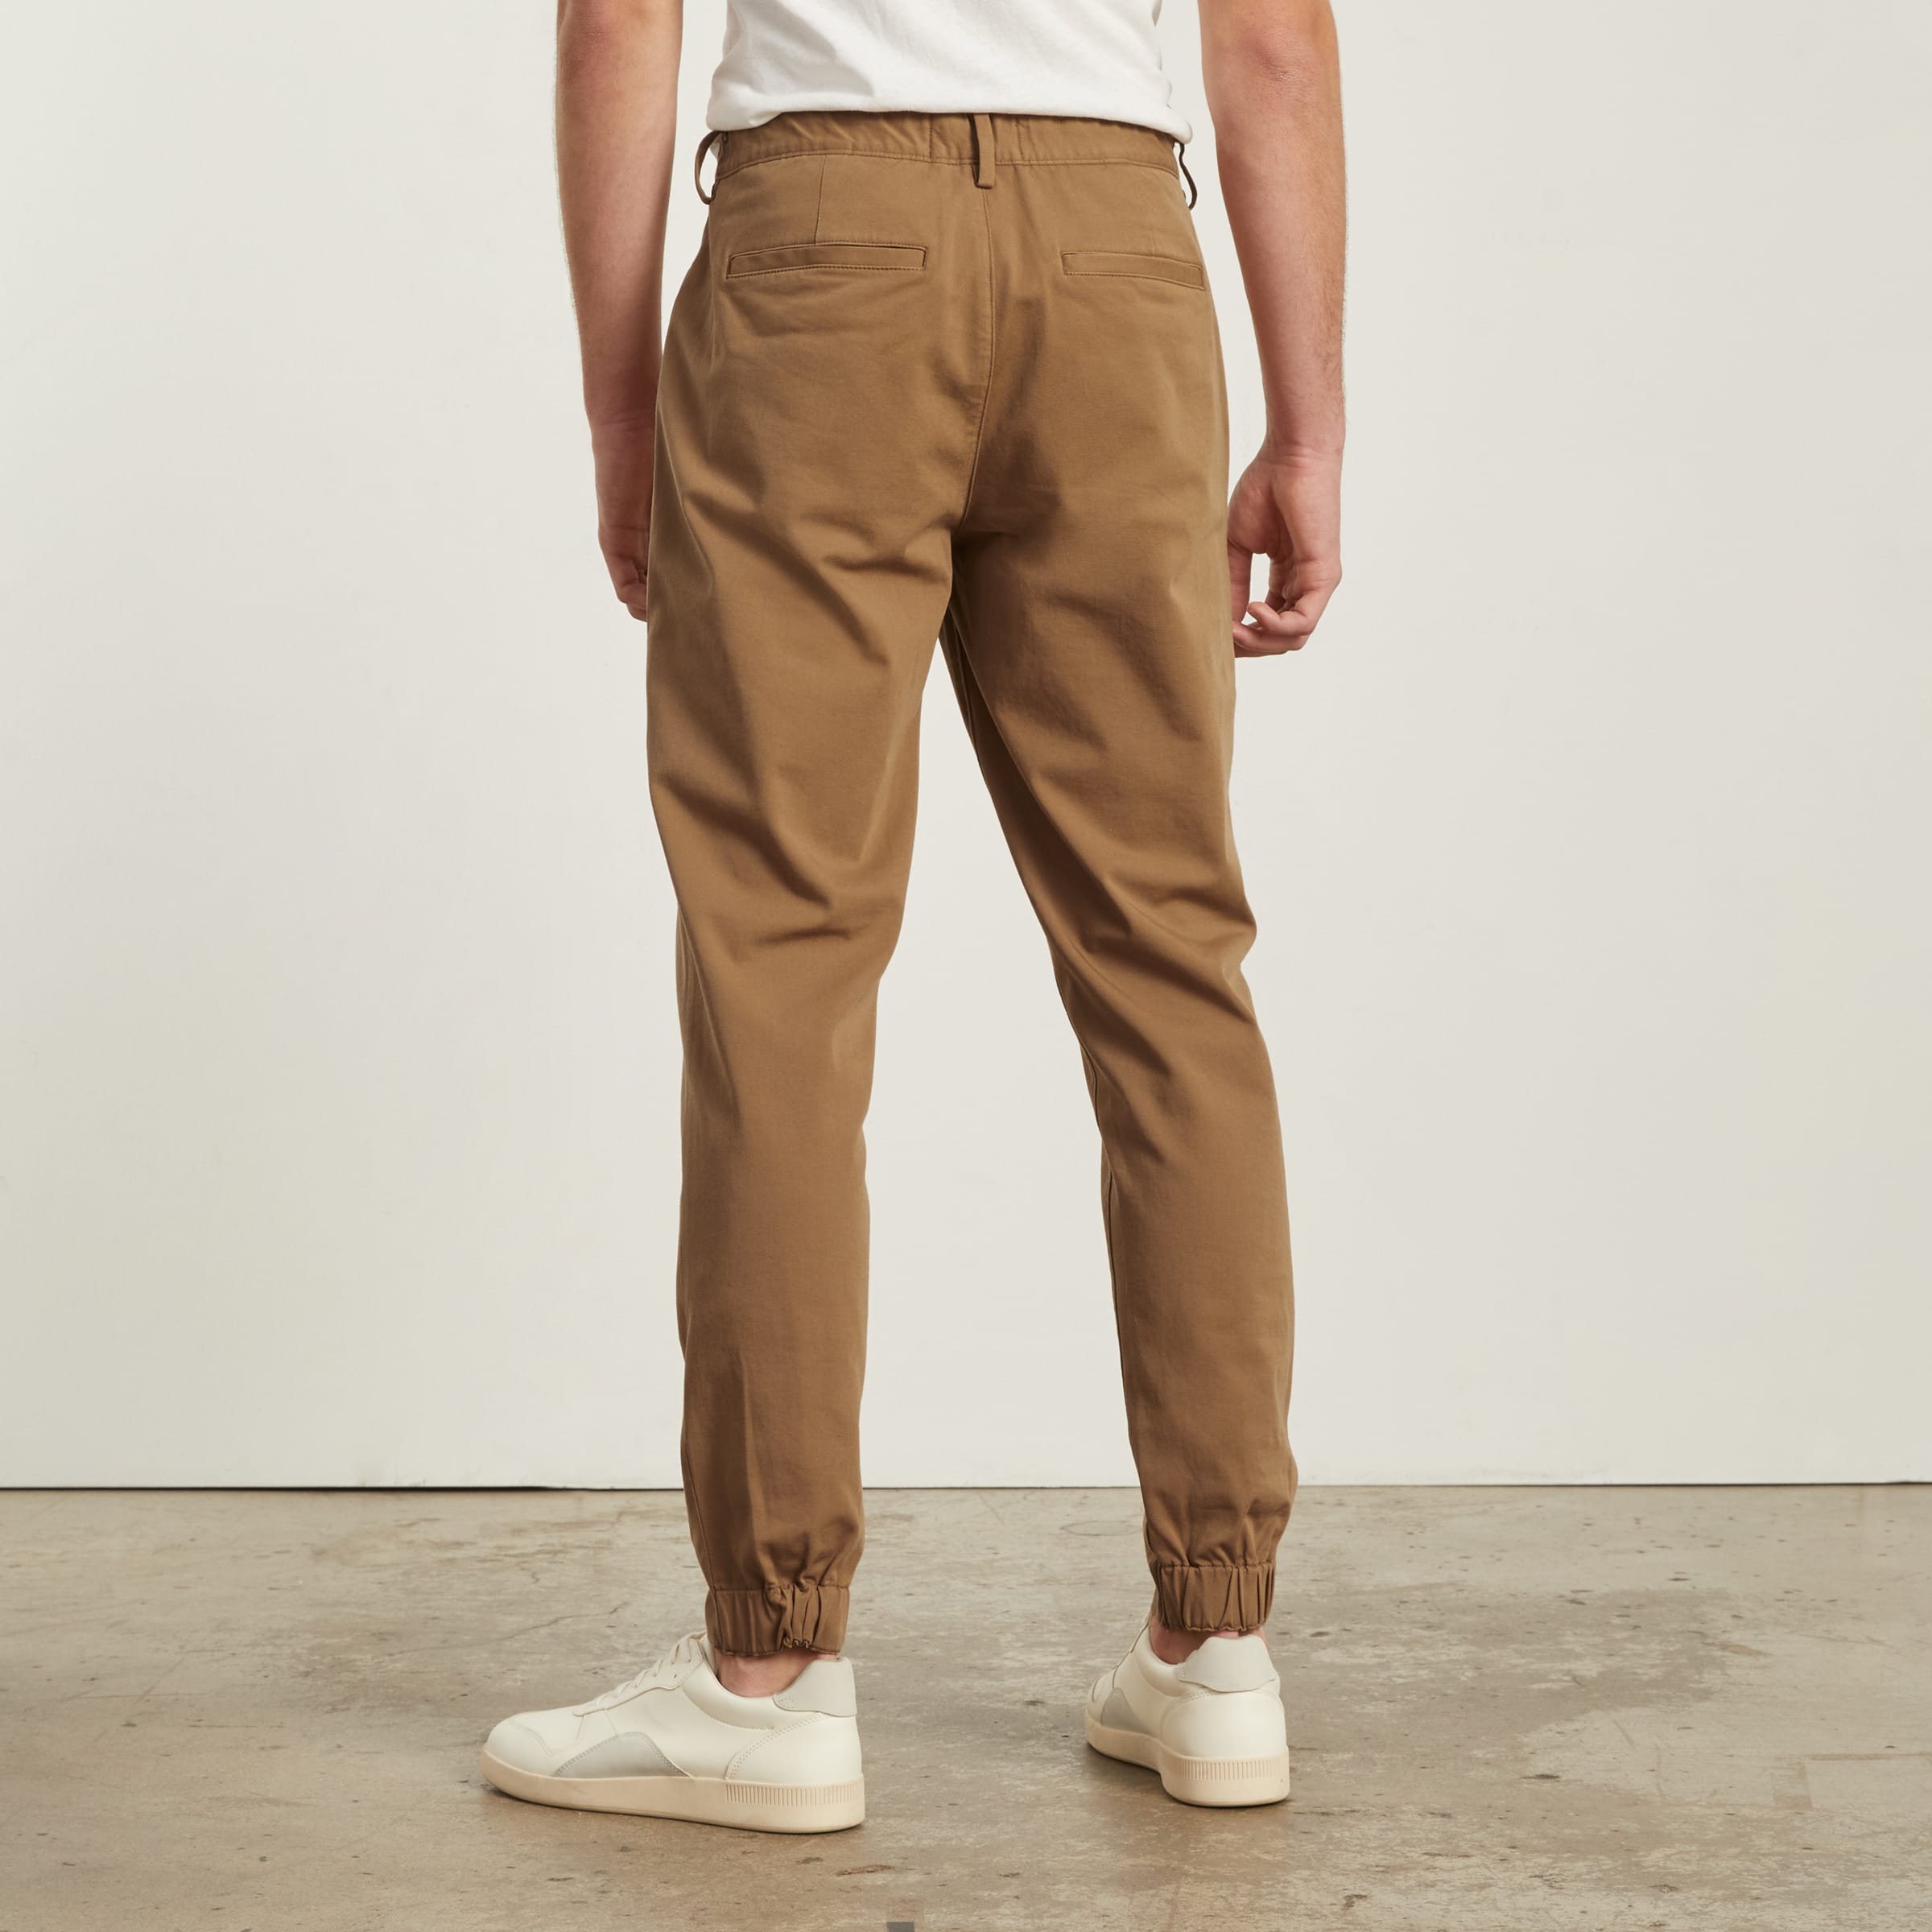 These Travel Pants Are 30% Off